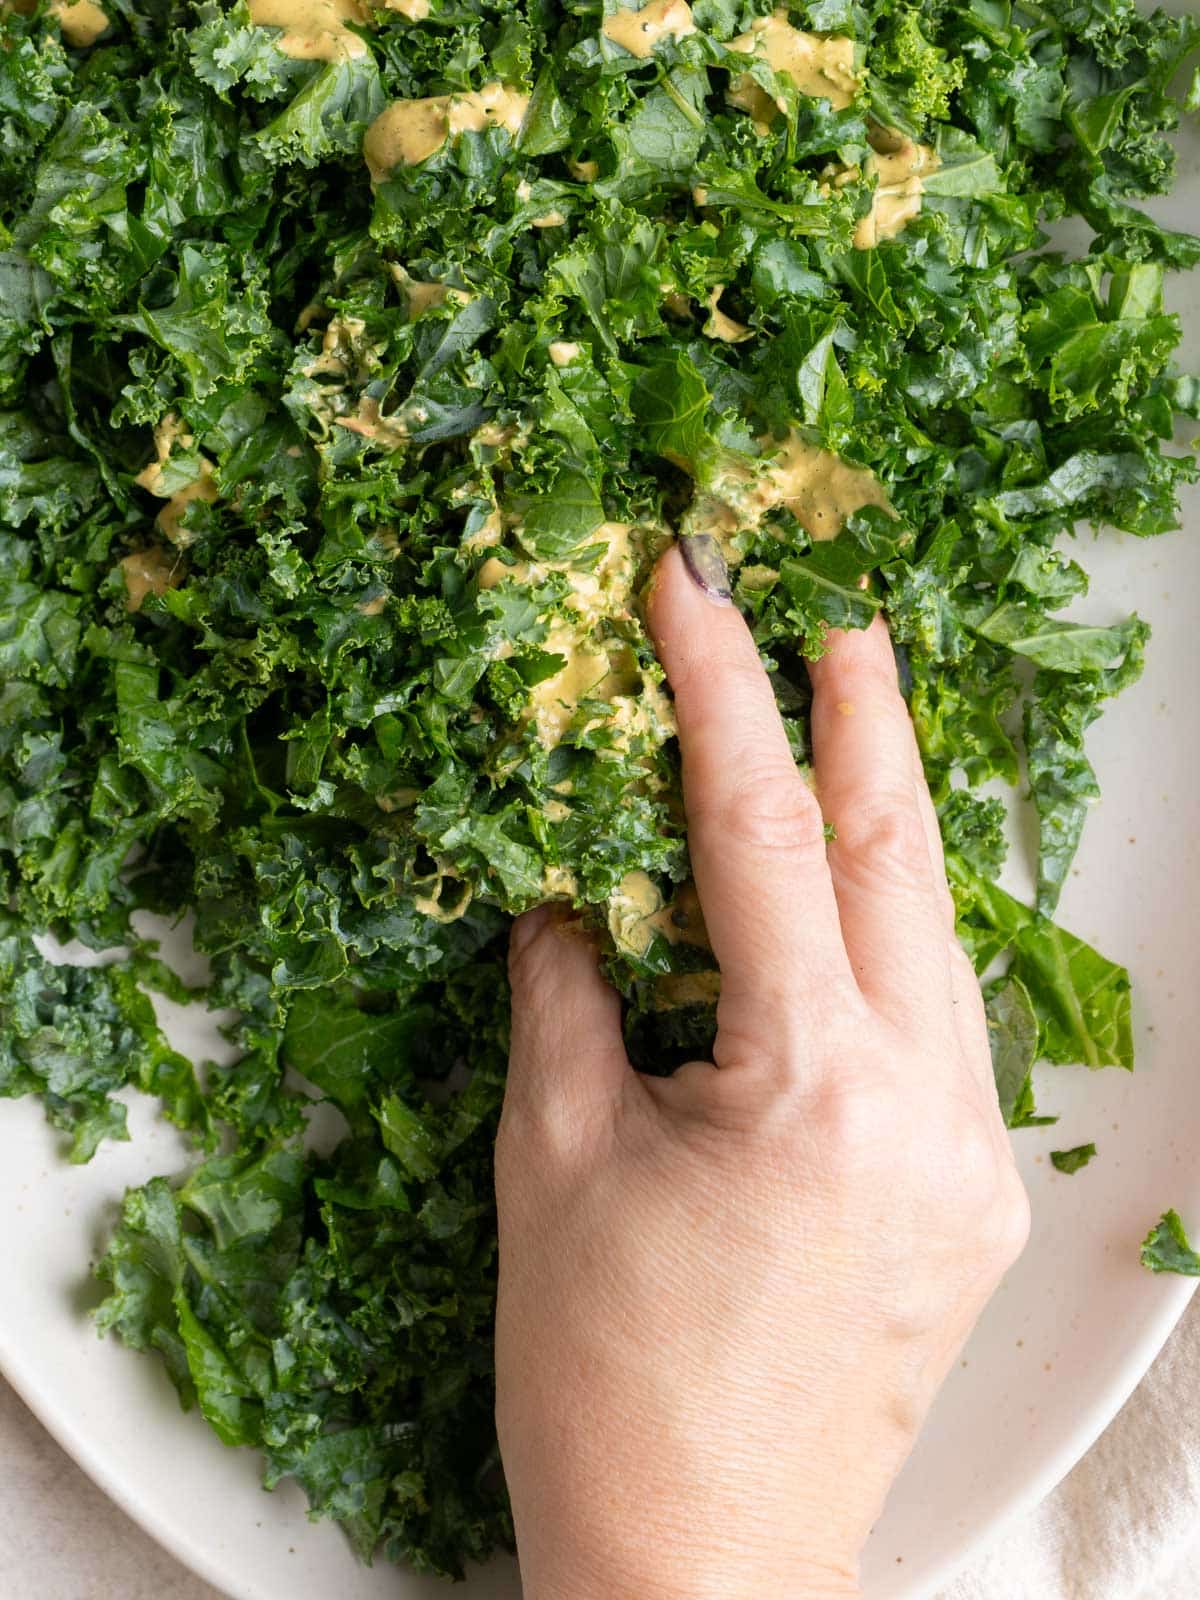 massaging dressing into the kale.